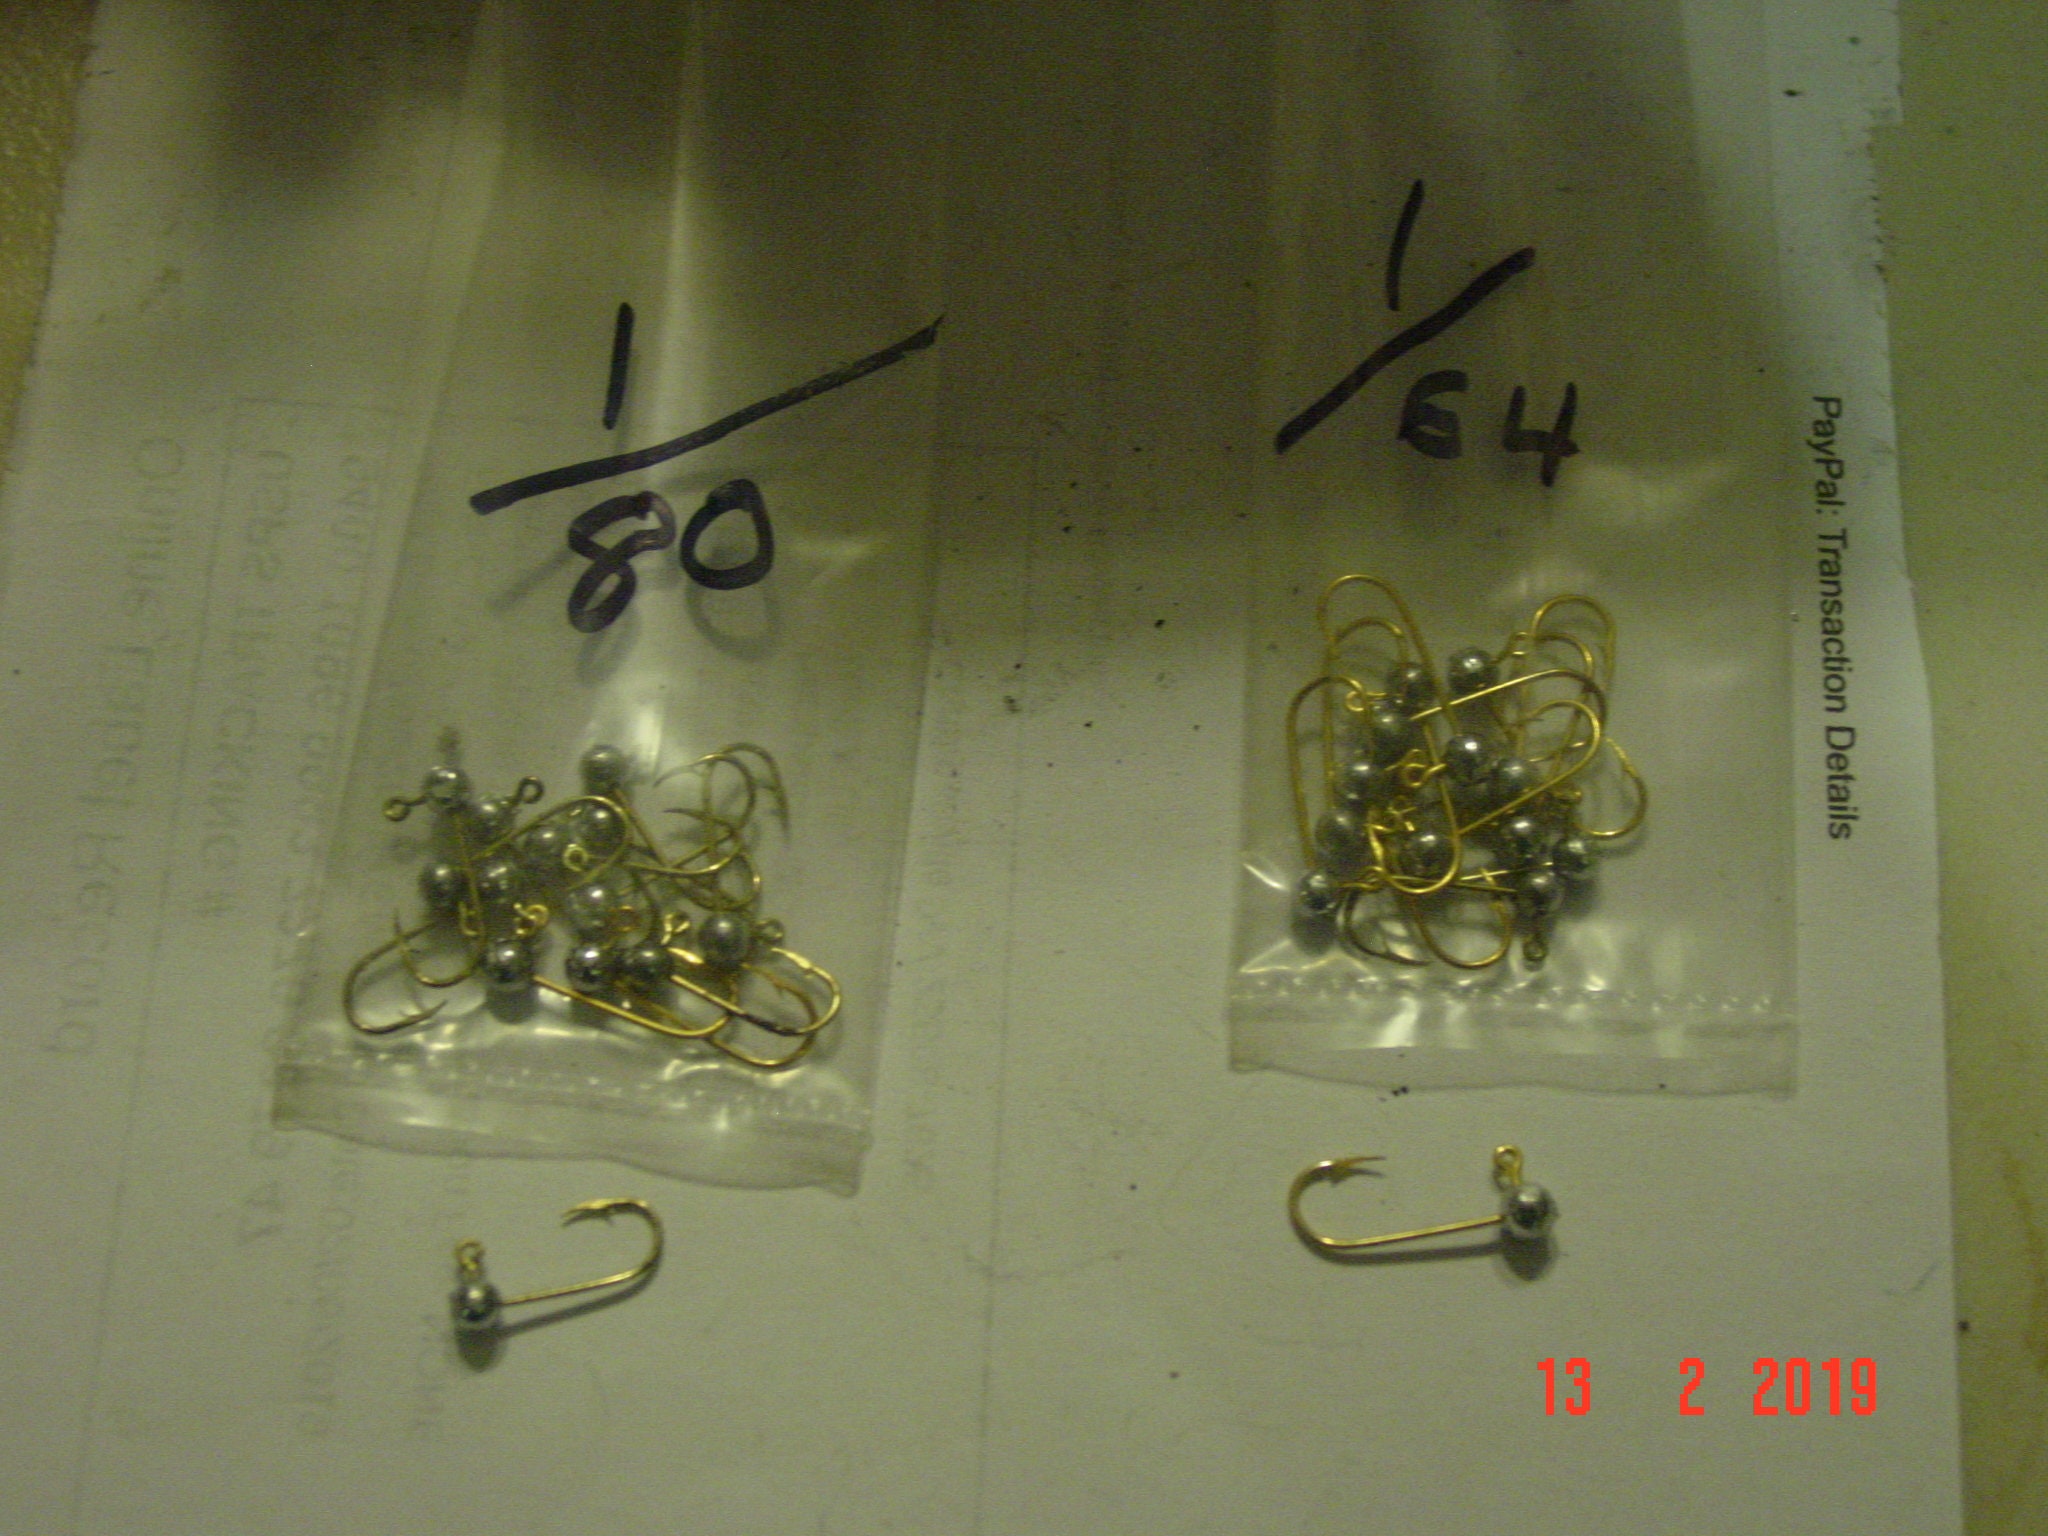 12 Pack 1/80,1/64,1/32,1/16,1/8,oz Jig Heads No Collar 575 Eagle Claw Hooks  